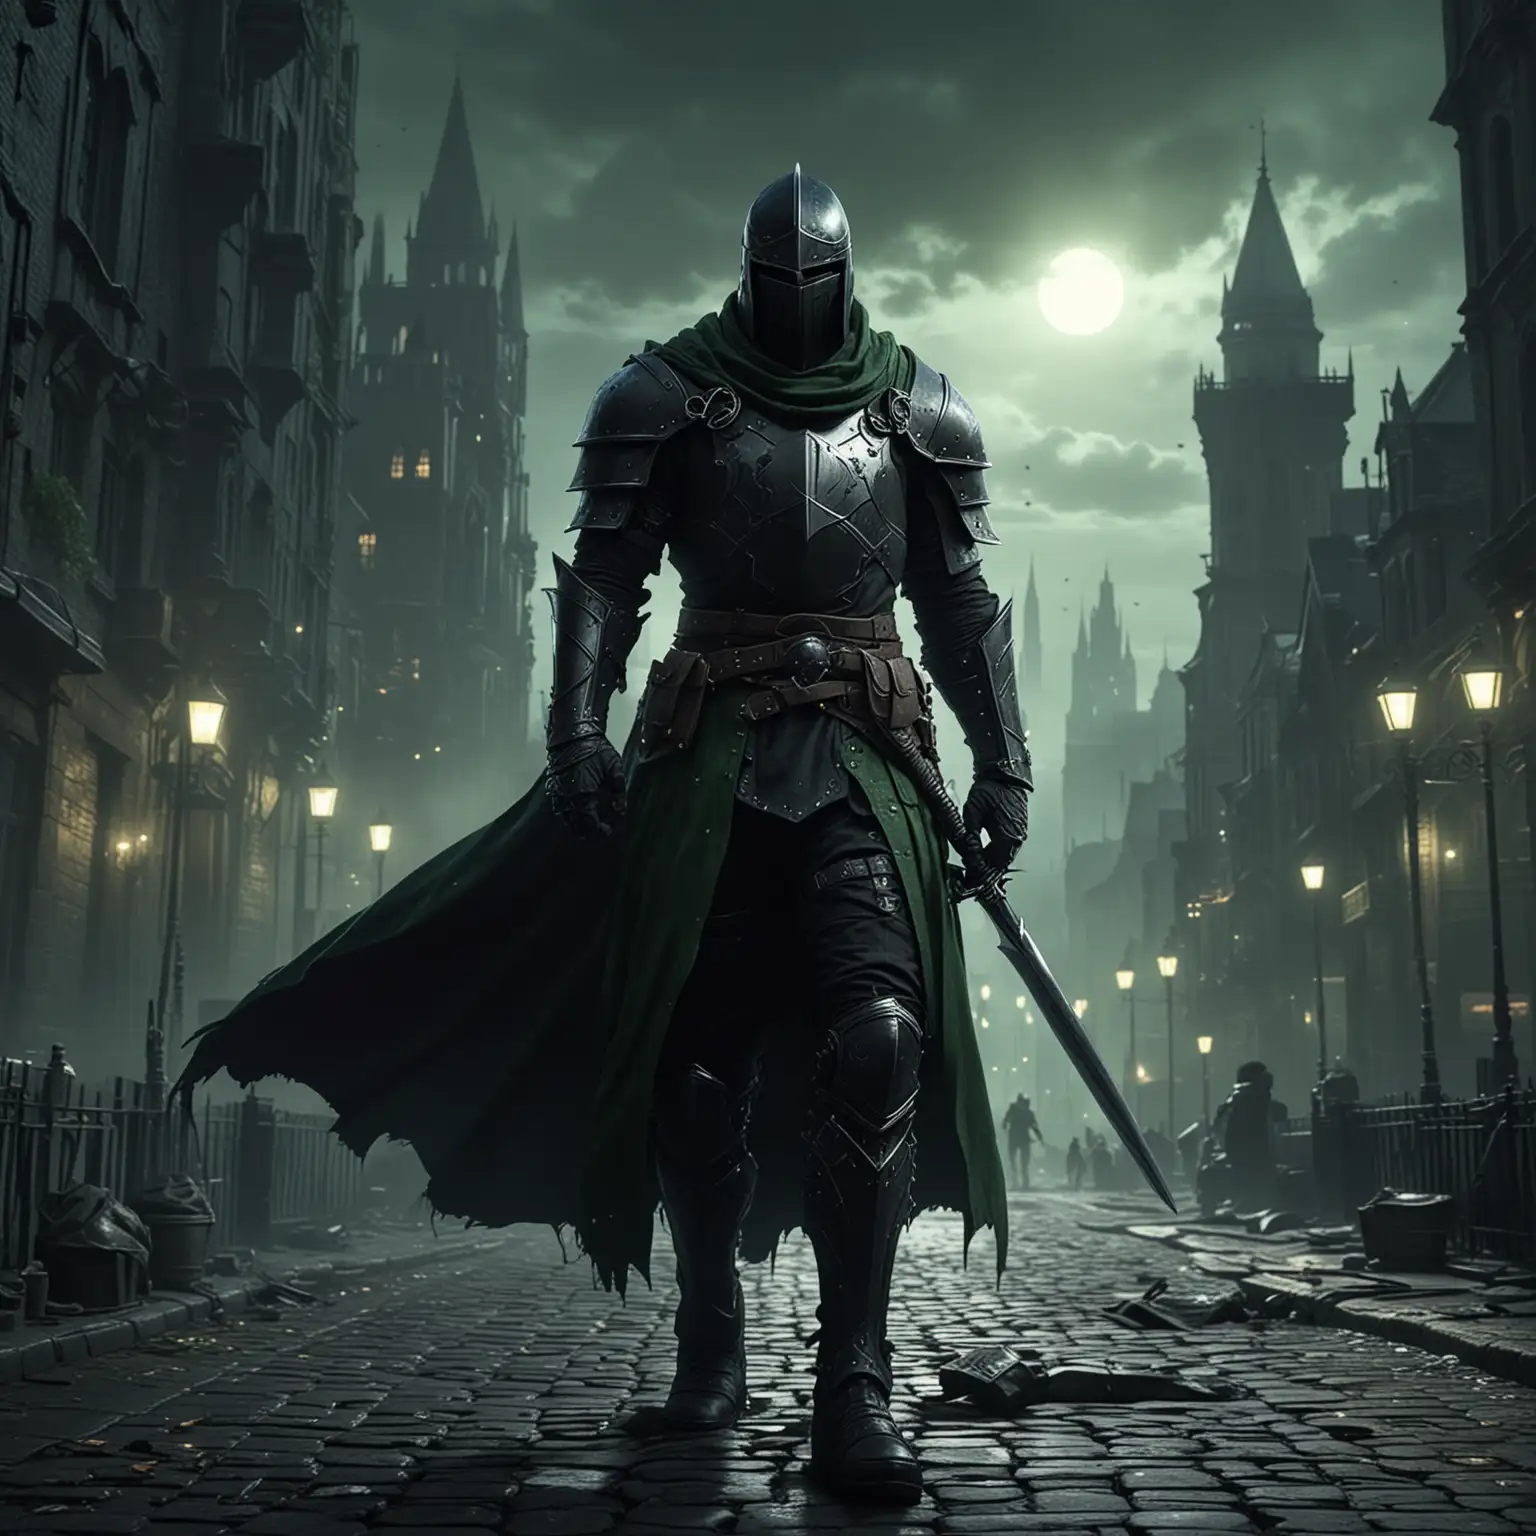 Mystical Knight in Dark Cityscape Black and Green Game Character Art